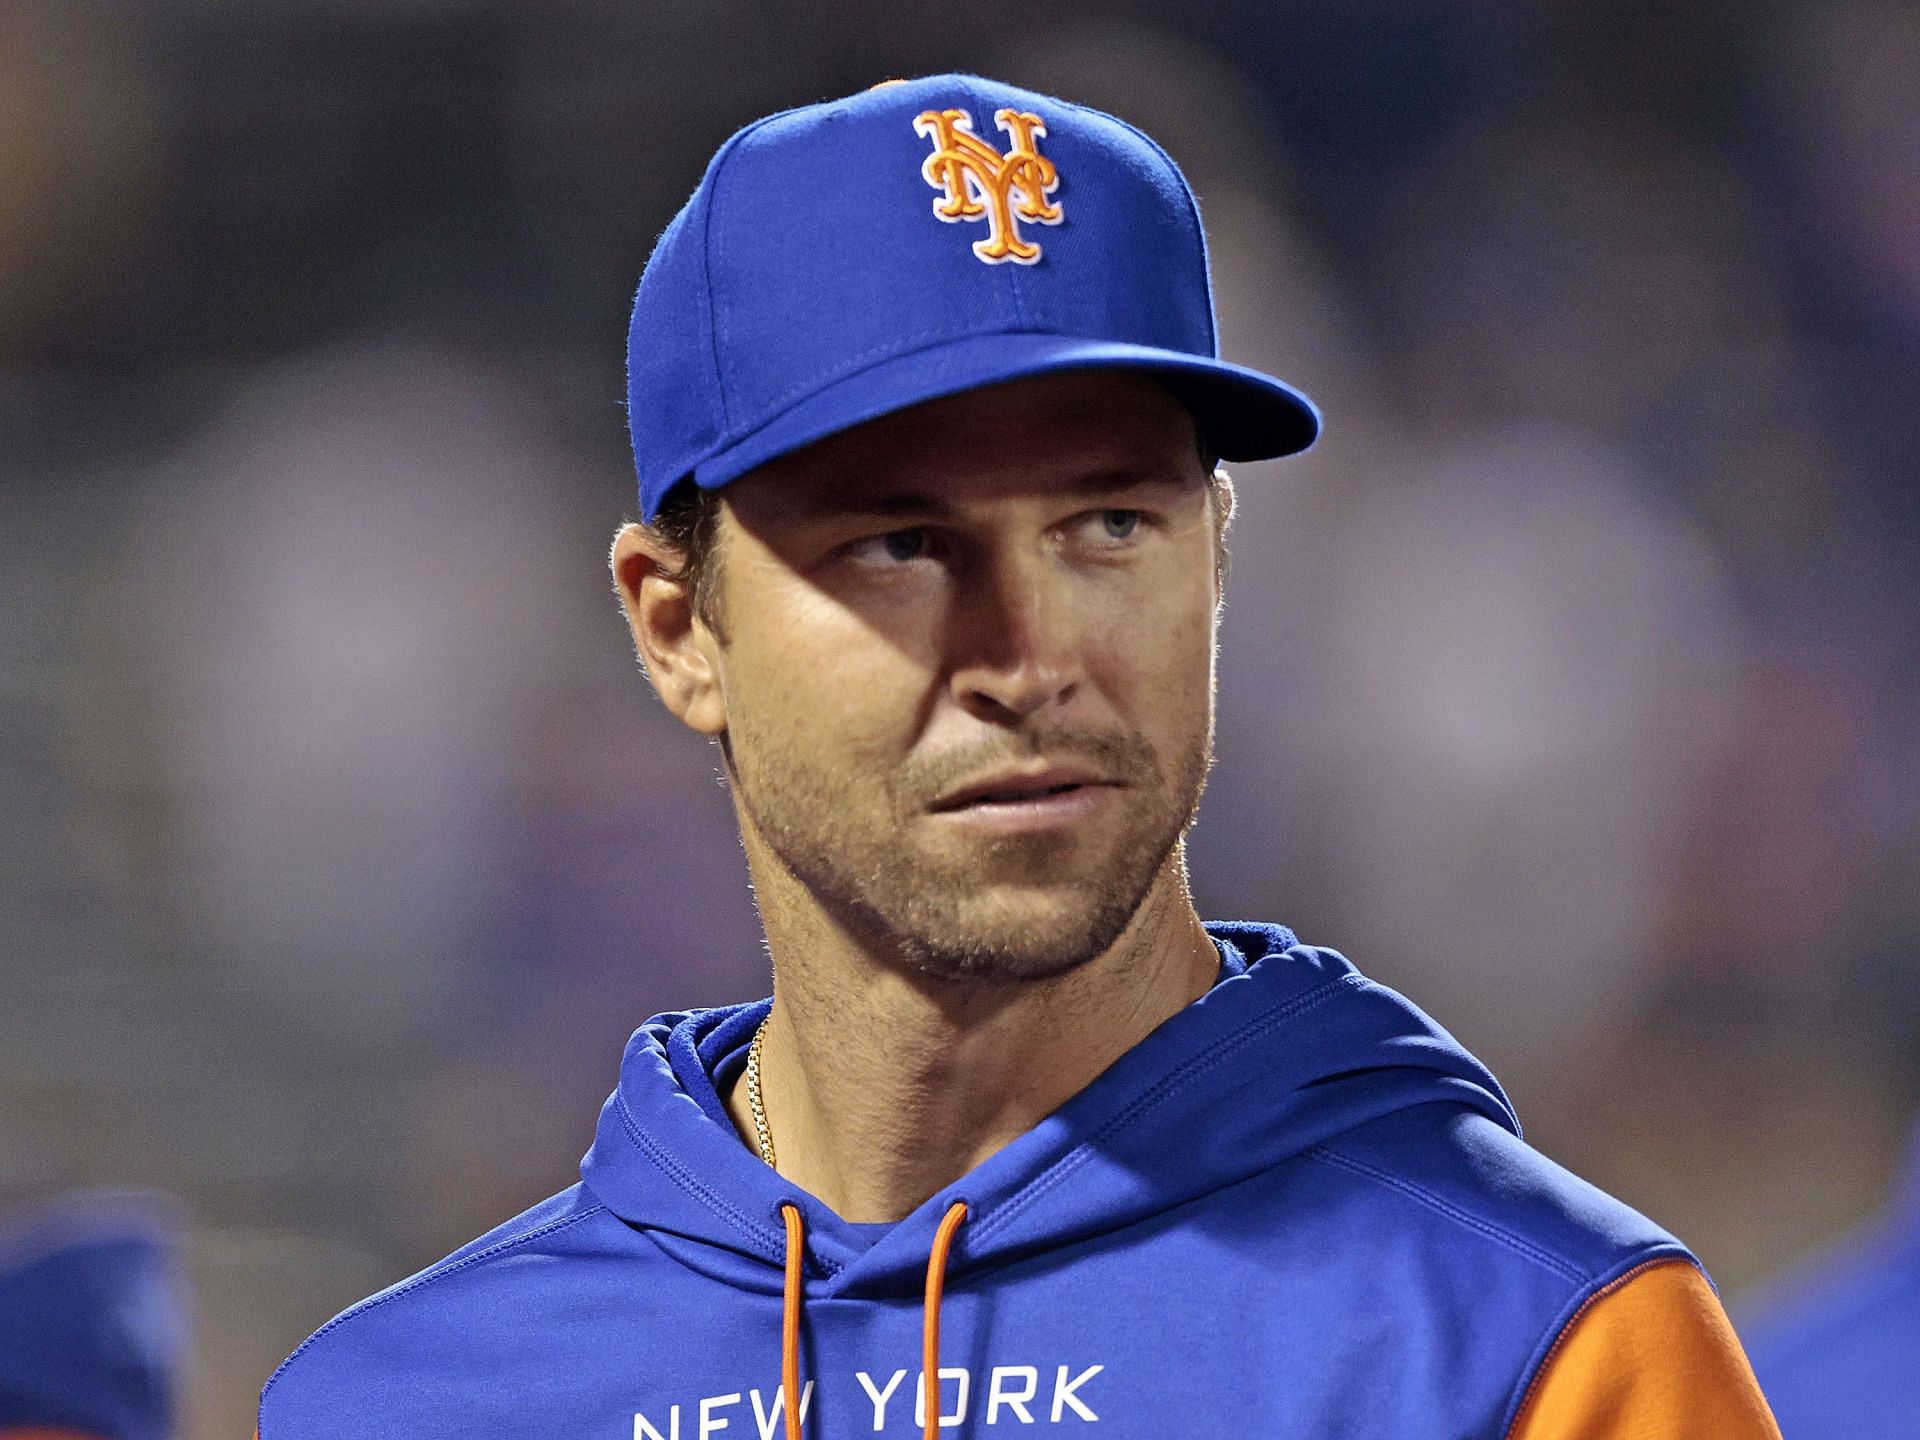 Jacob deGrom may return to the Mets as early as Monday.